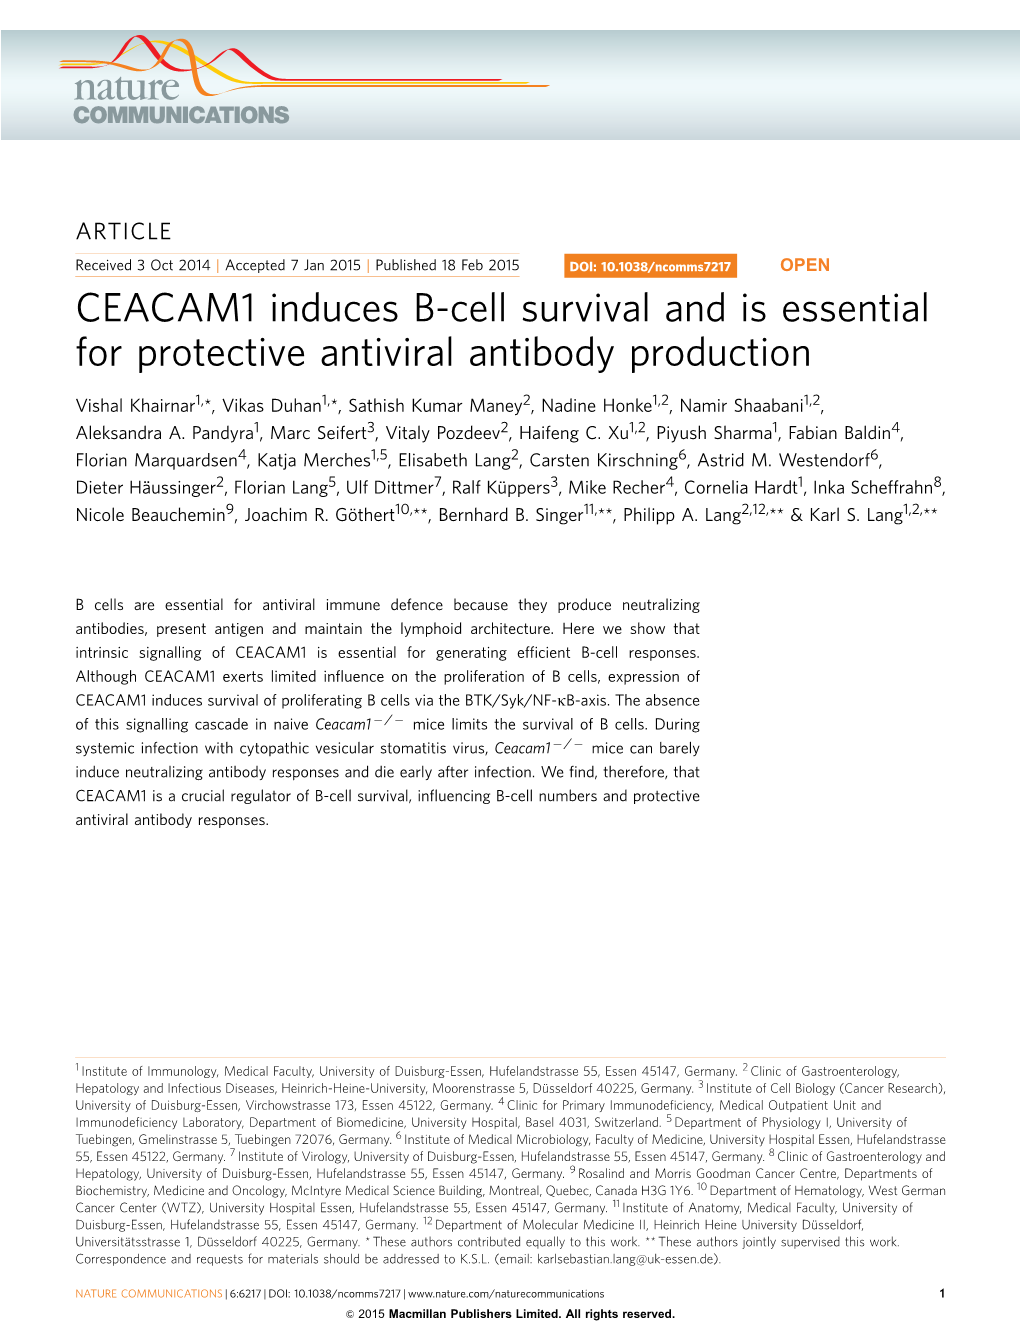 CEACAM1 Induces B-Cell Survival and Is Essential for Protective Antiviral Antibody Production